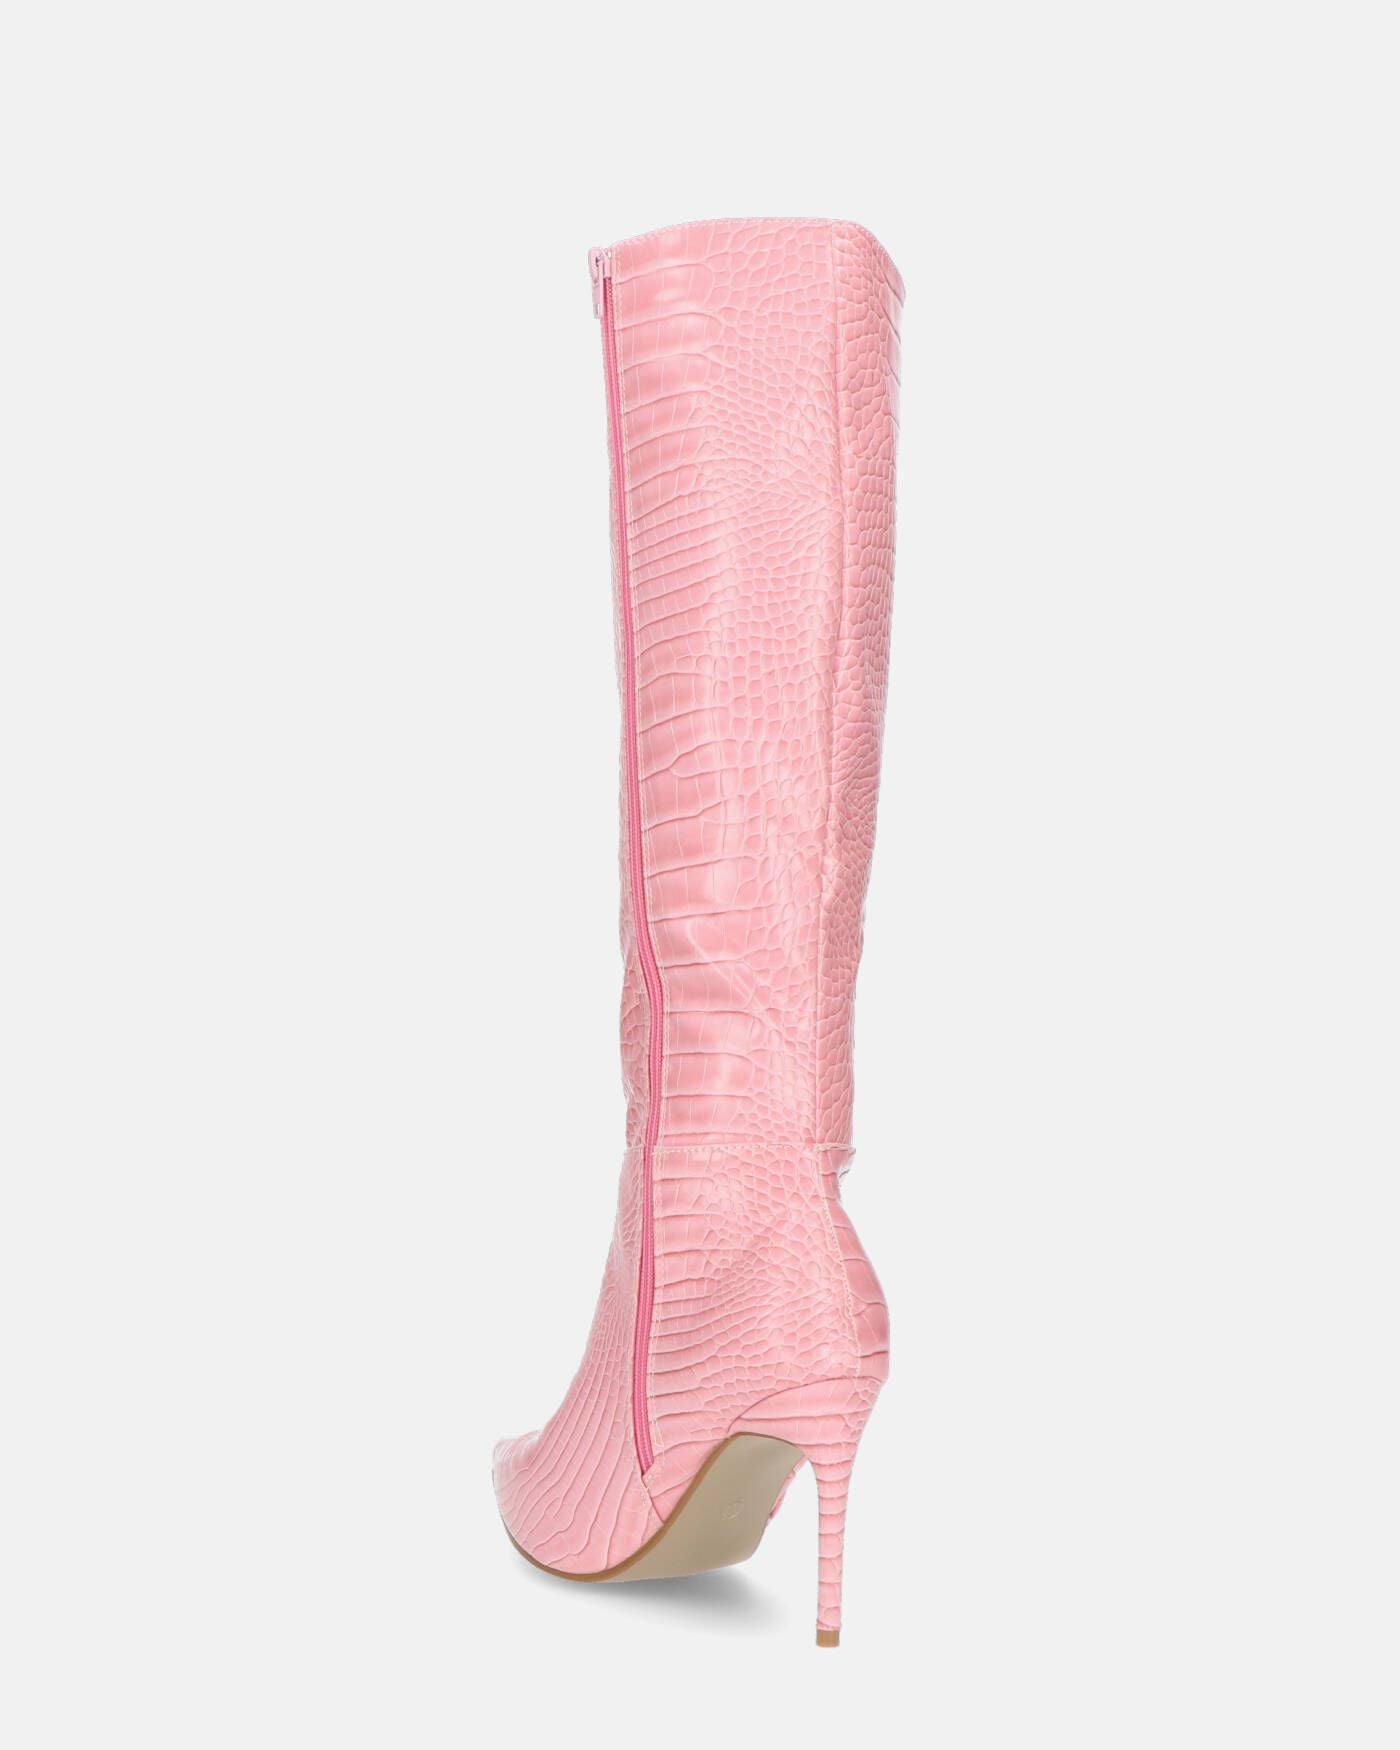 LAILA - high boots in pink eco-leather with crocodile texture and side belt